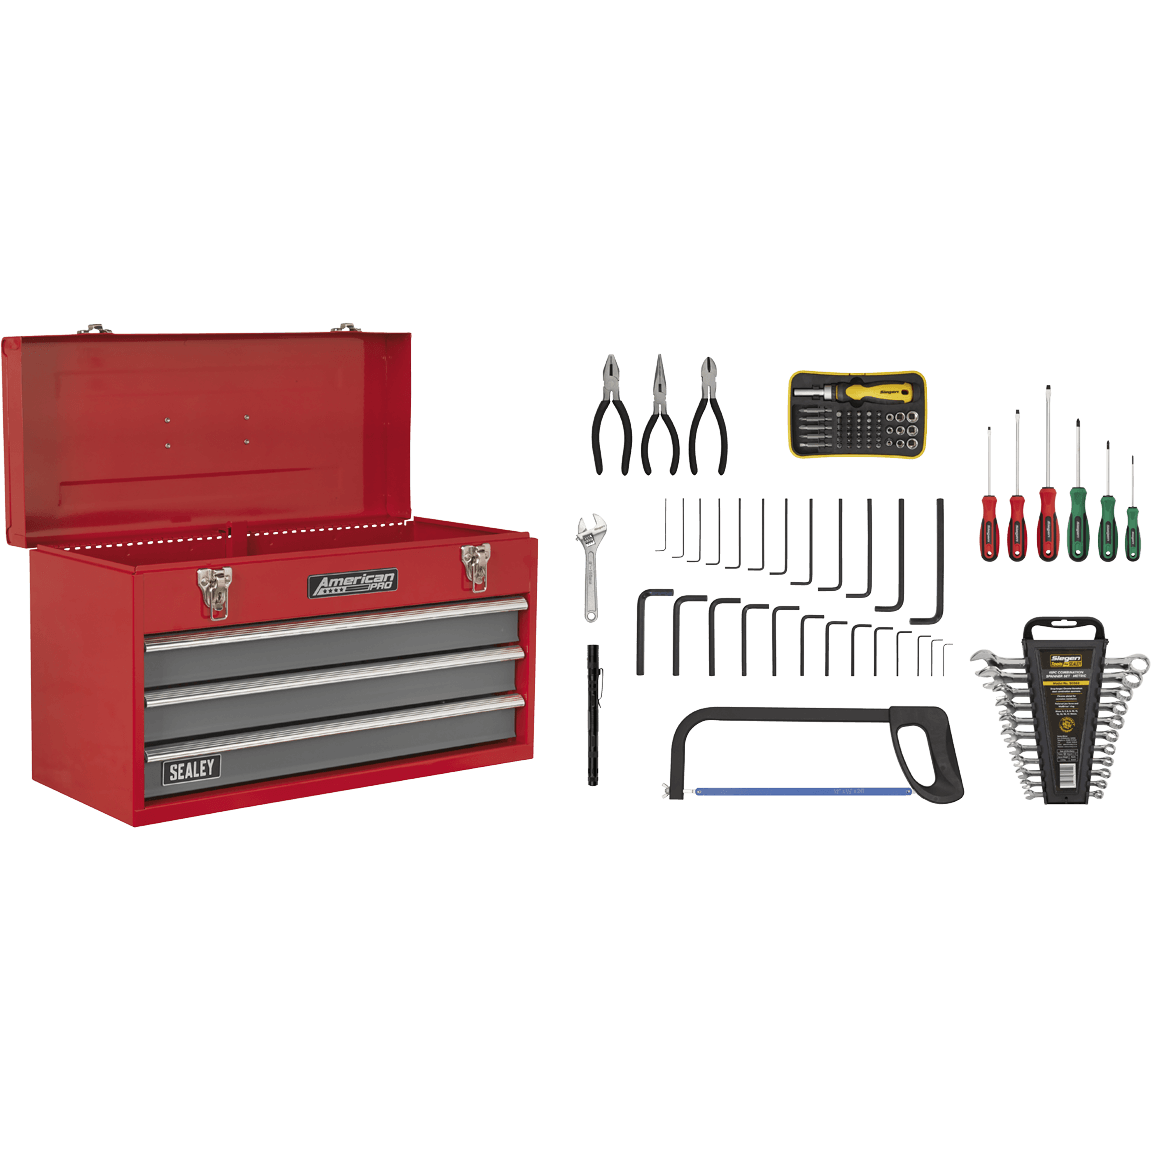 Sealey American Pro 3 Drawer Tool Chest + 93 Piece Tool Kit Red / Grey